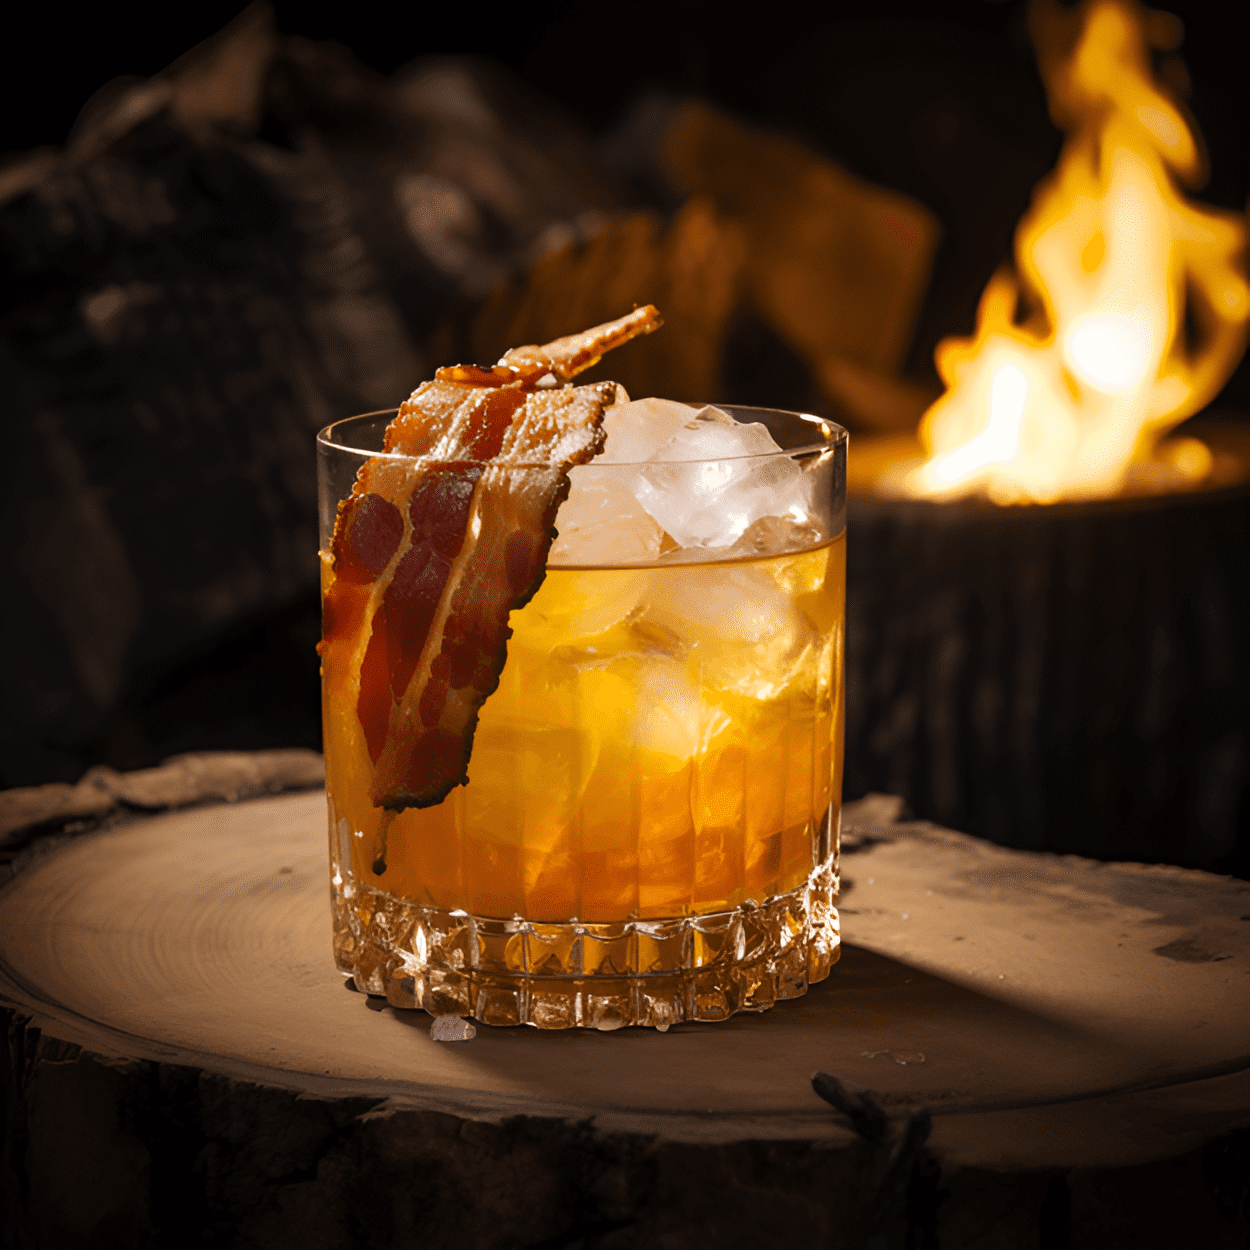 Lumberjack Cocktail Recipe - The Lumberjack cocktail is a bold, robust drink with a strong whiskey flavor. It has a hint of sweetness from the maple syrup, and a slight tang from the lemon juice. The cocktail is full-bodied, with a warm, lingering finish.